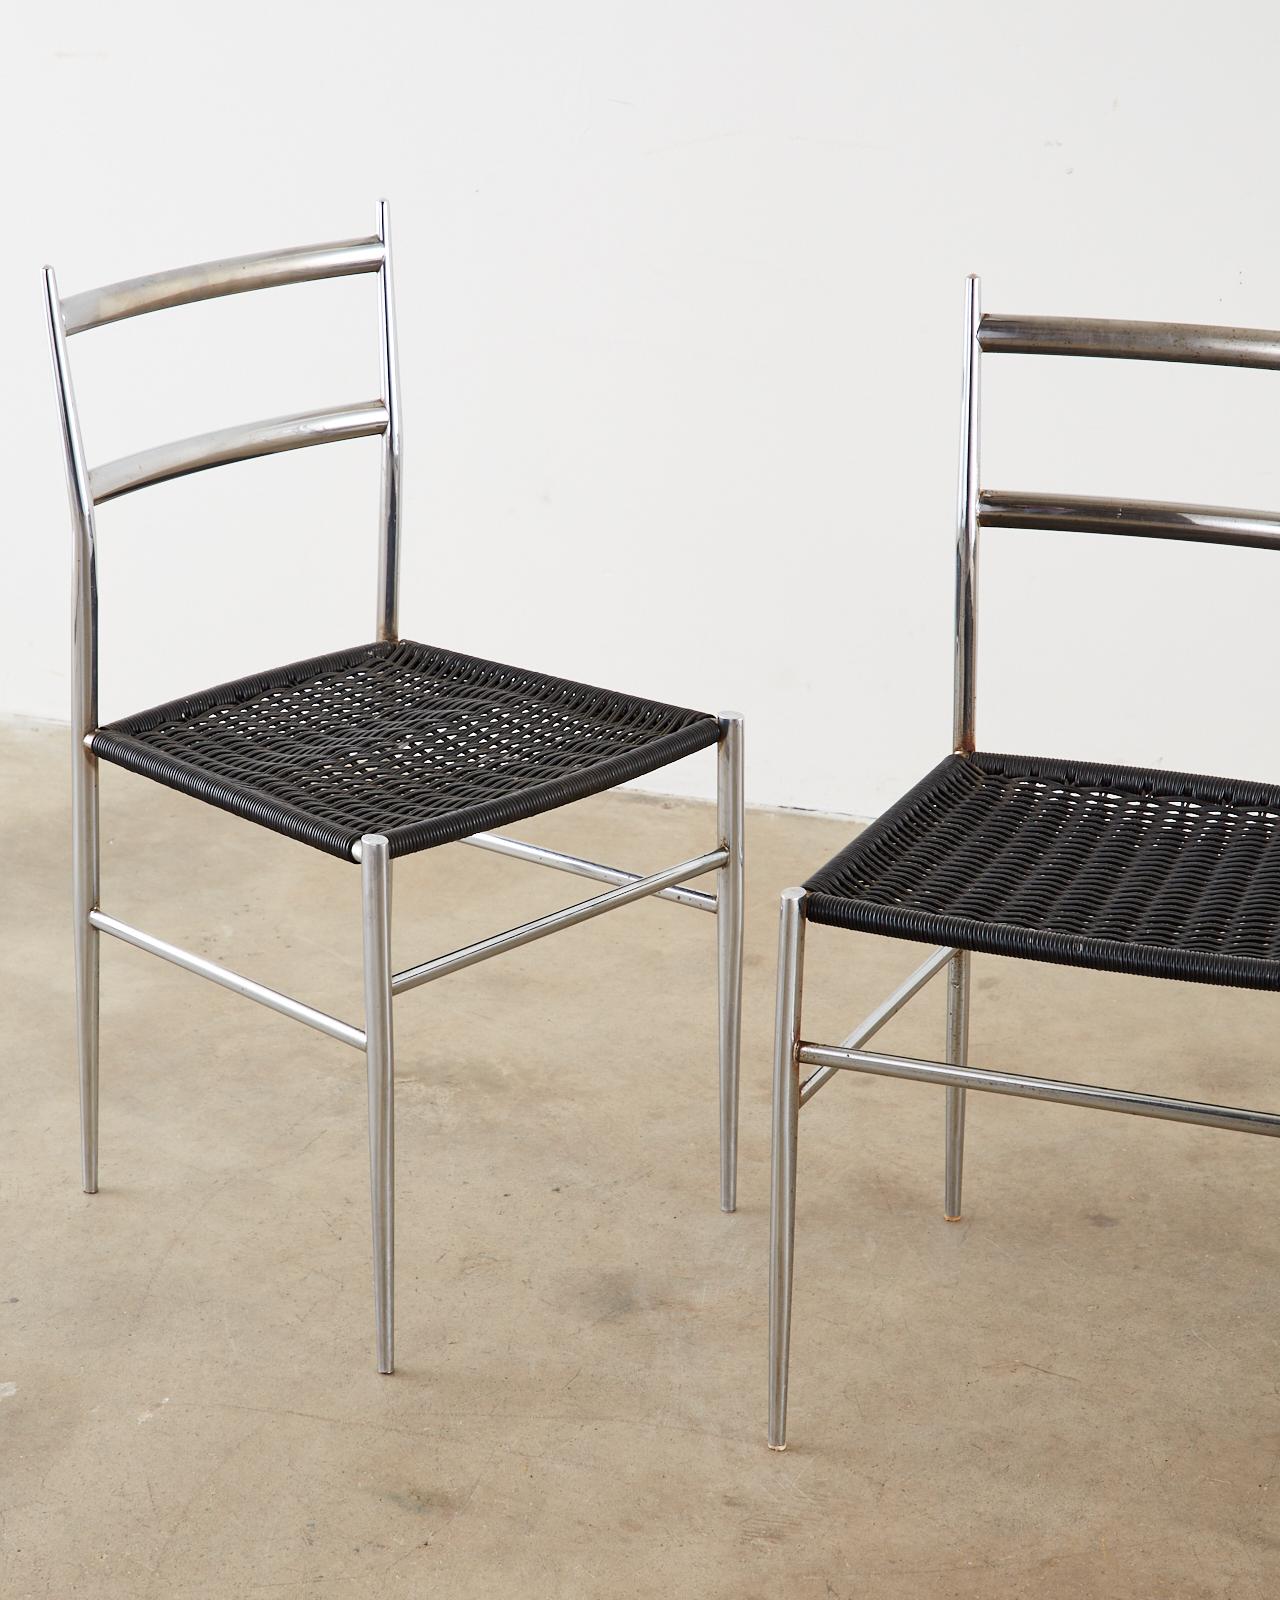 Mid-20th Century Set of Four Chrome Dining Chairs, style of Gio Ponti's 